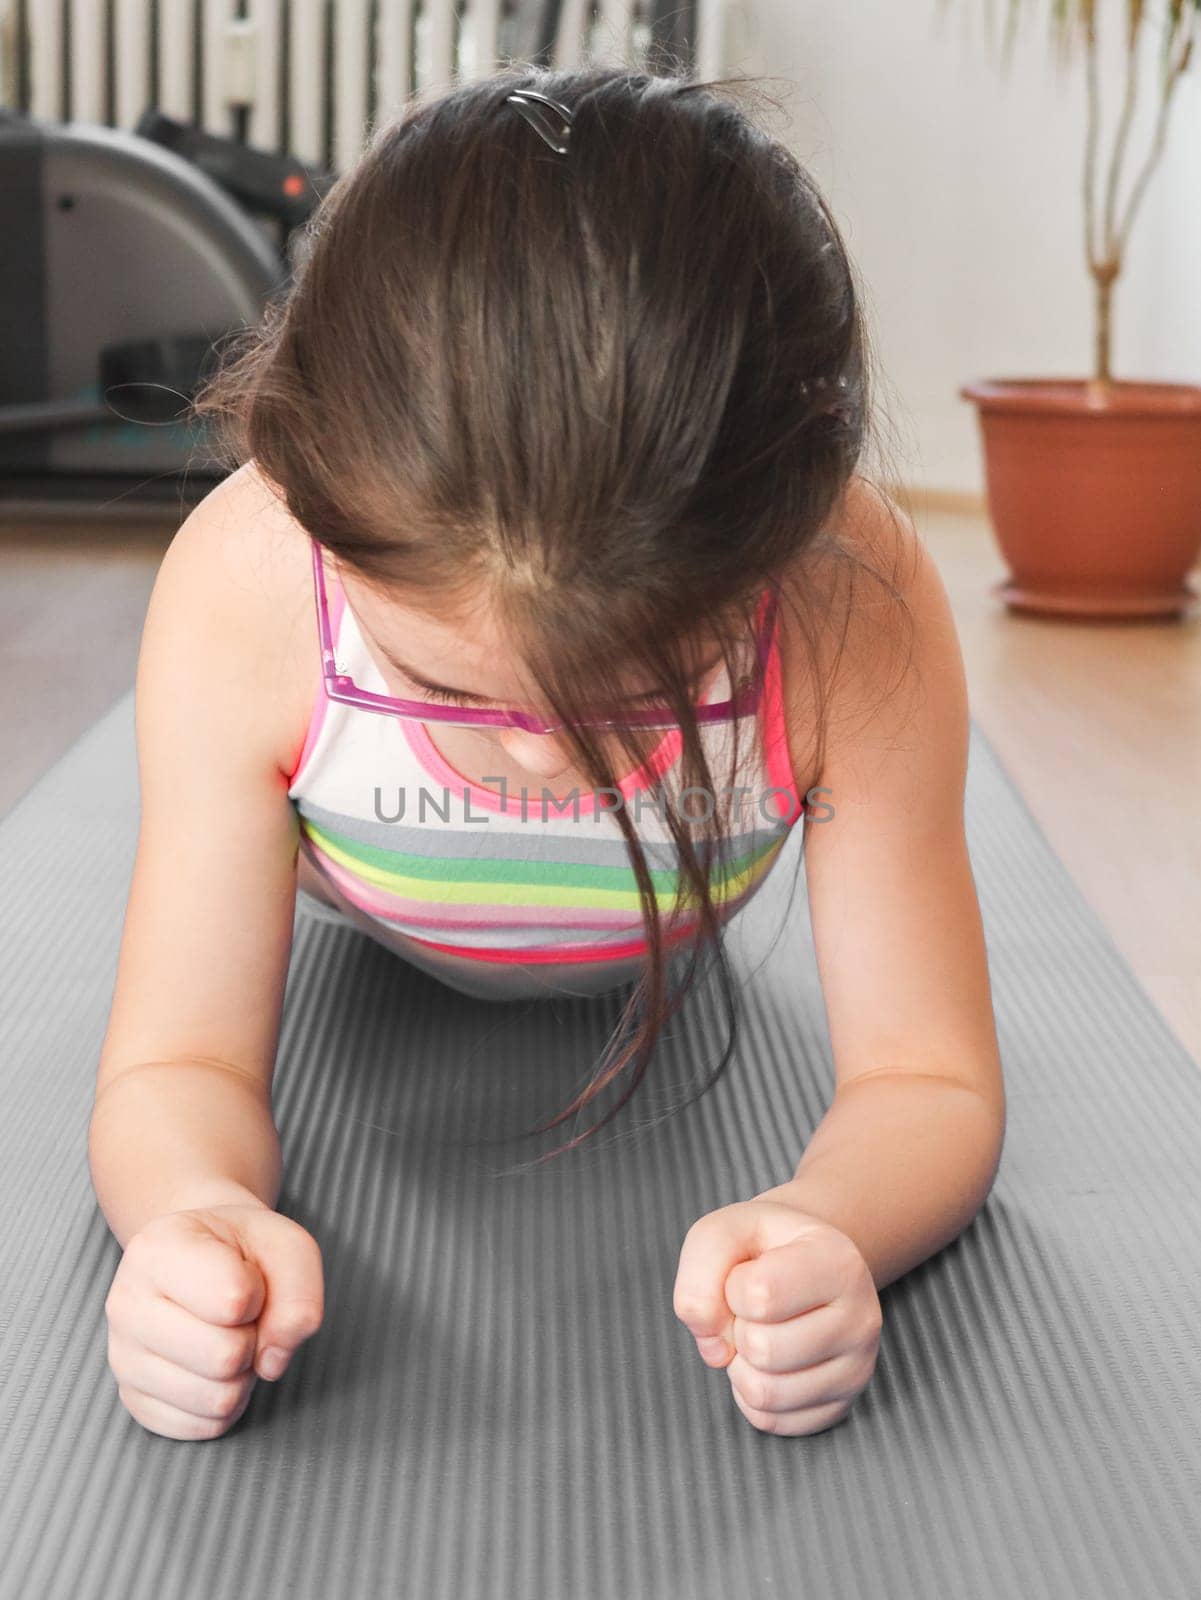 A little caucasian girl in a tracksuit and glasses does a plank exercise, clenching her hands into fists on a gray rug in a room on a wooden floor, close-up side view. The concept of home fitness, child sports and healthy lifestyle.